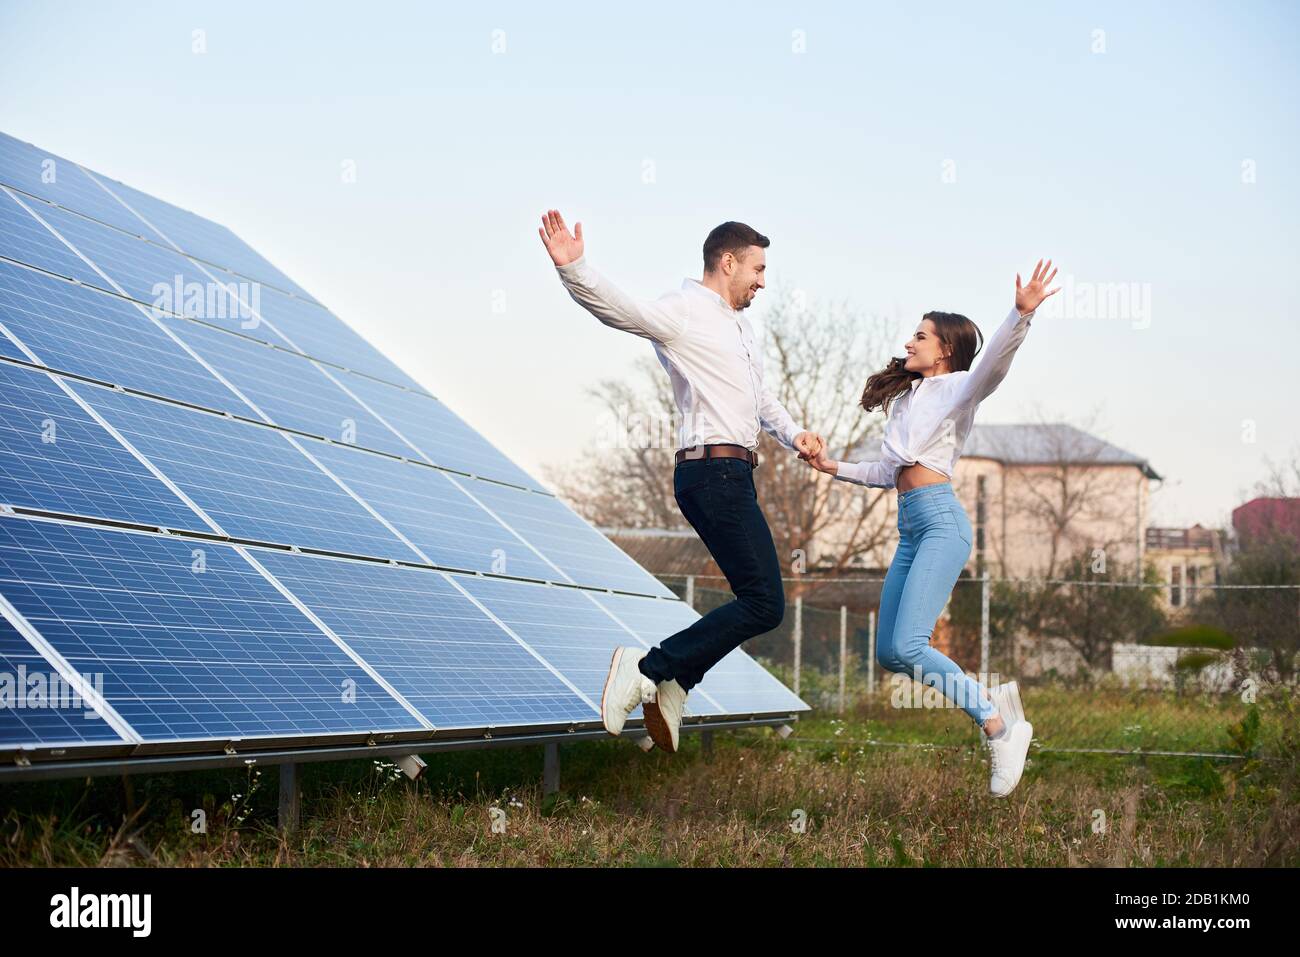 Young family jumping holding hands near the house with solar panels. Guy and girl are dressed in jeans, shirts and white sneakers are looking at each other. Solar energy concept image Stock Photo